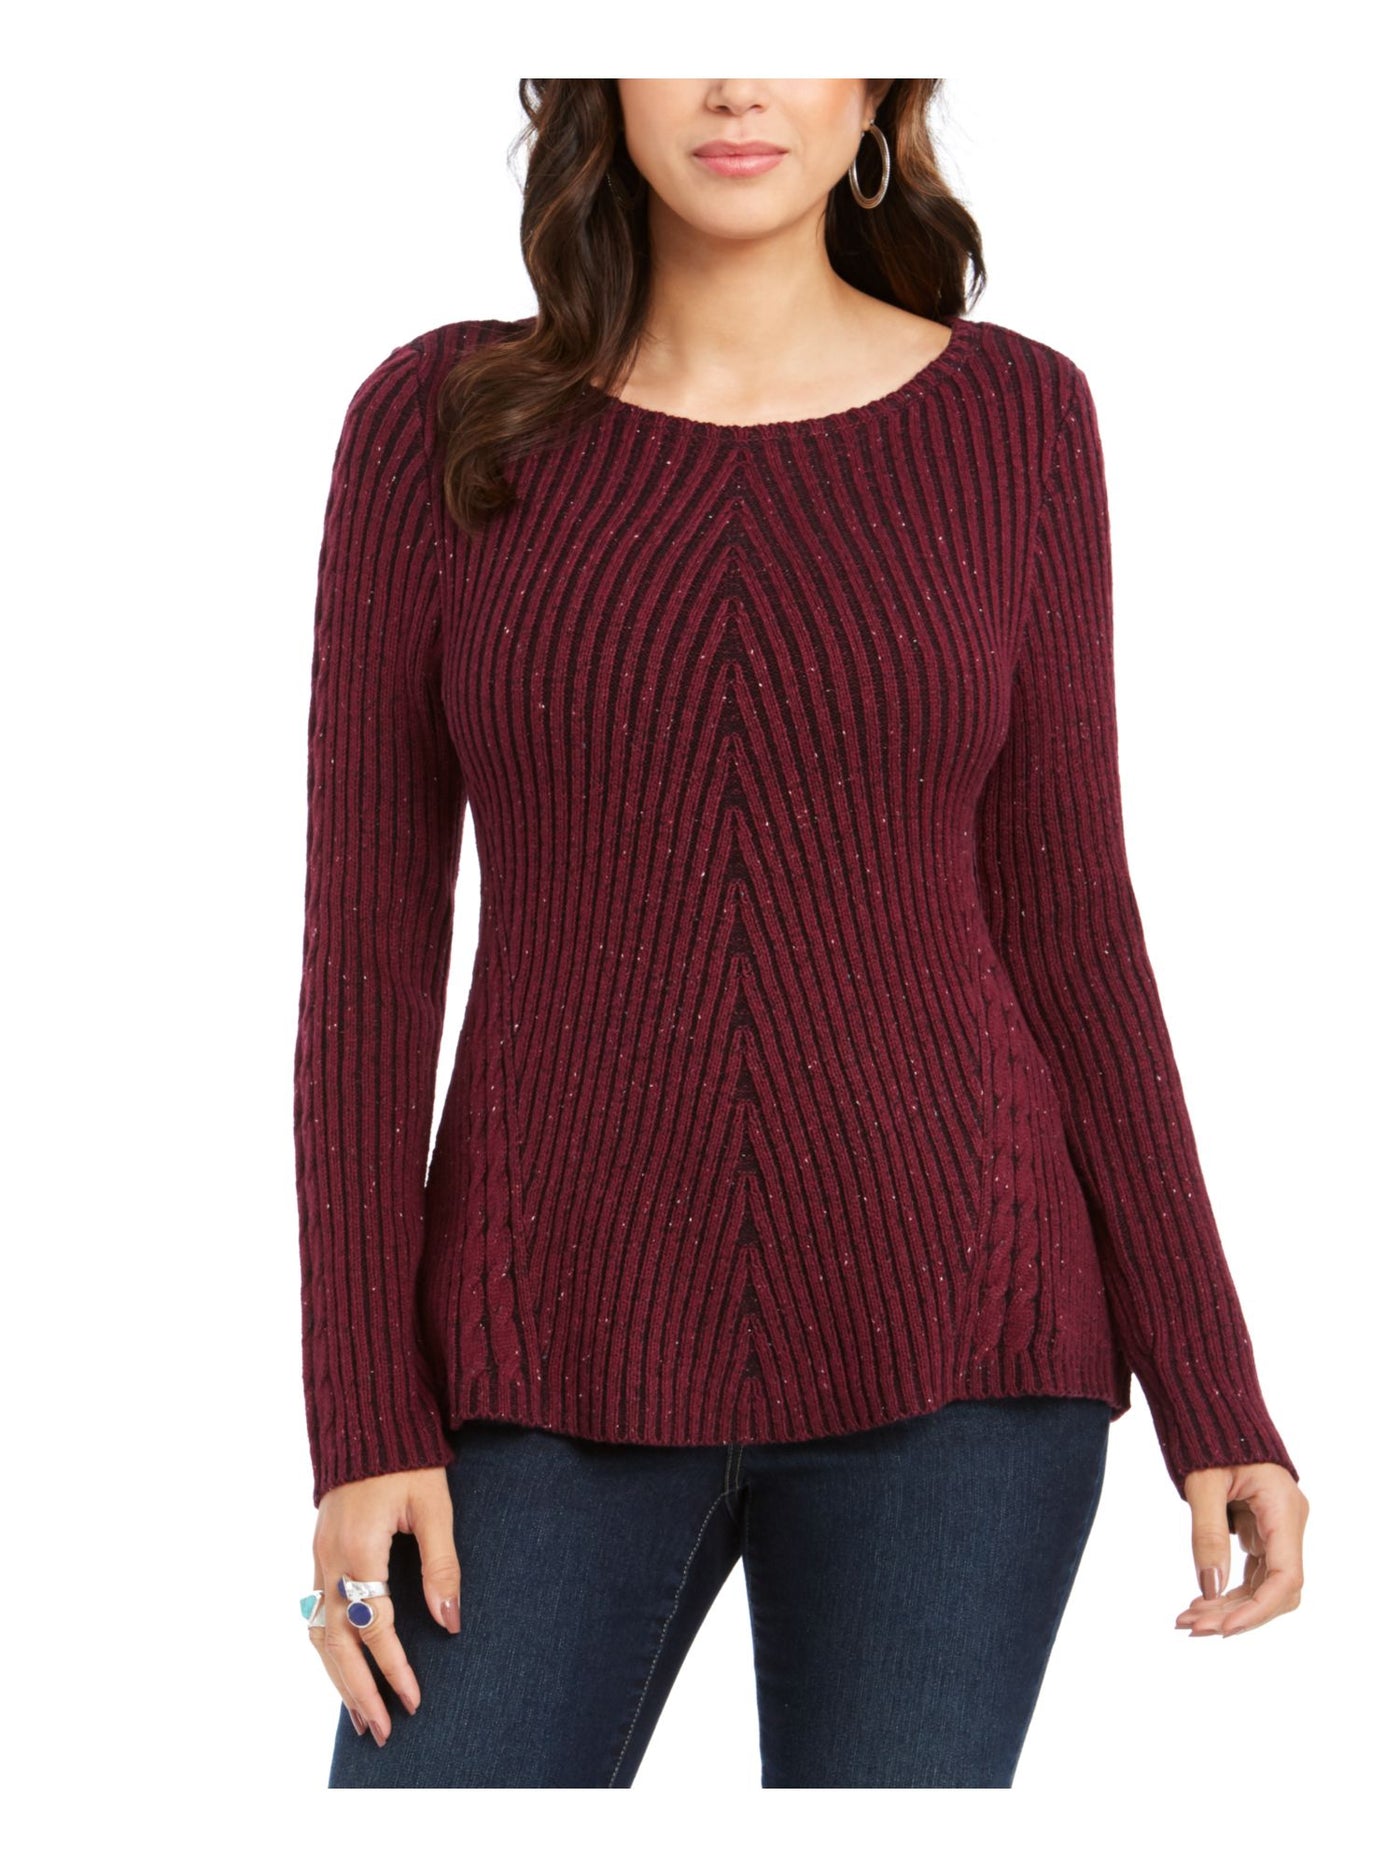 STYLE & COMPANY Womens Burgundy Textured  Knitted Printed Long Sleeve Jewel Neck T-Shirt L